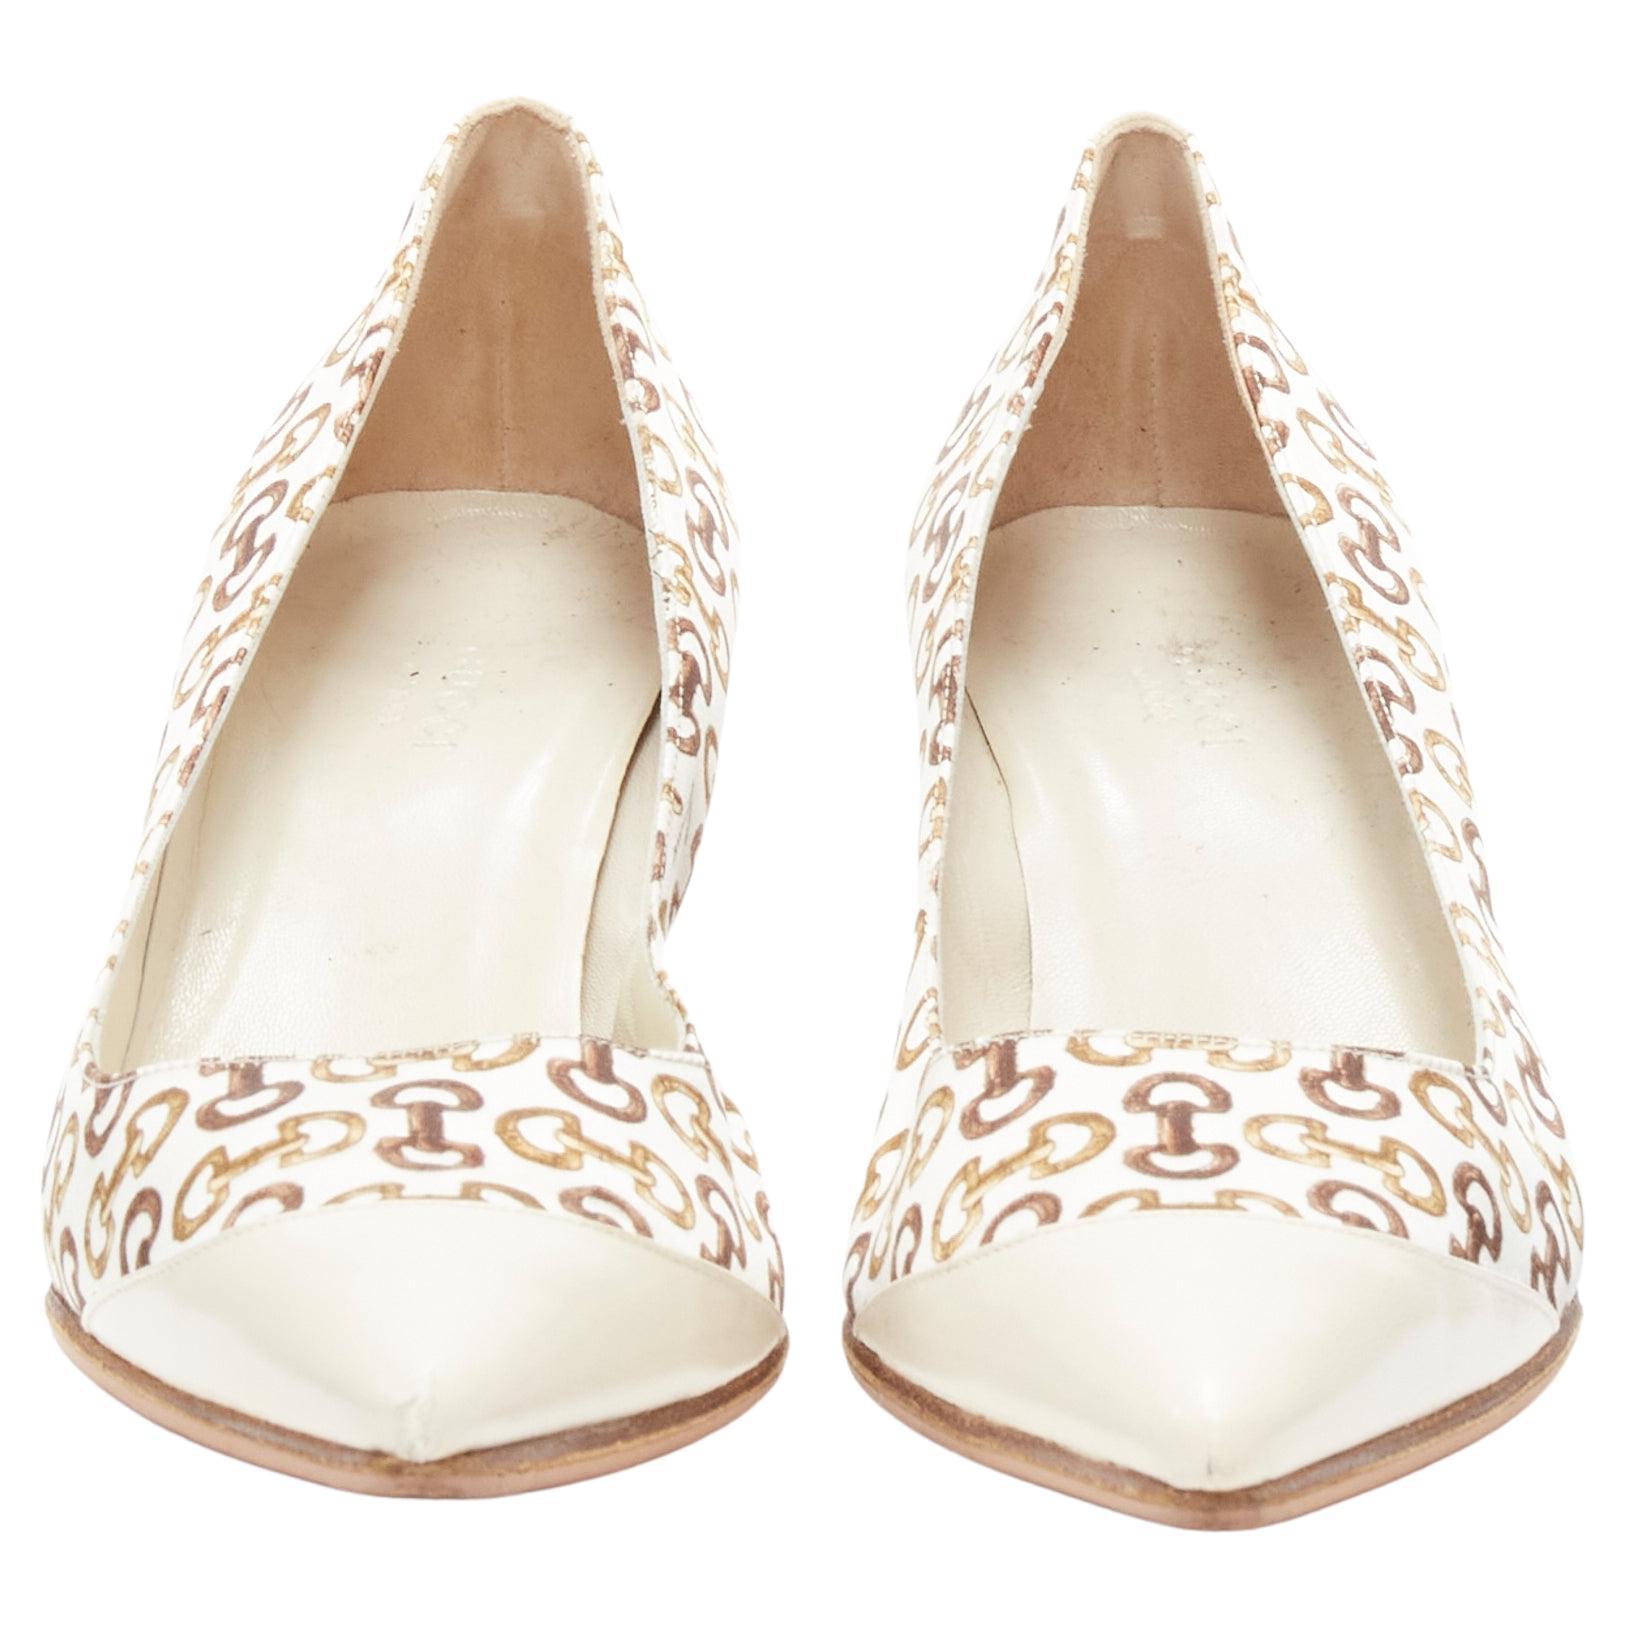 GUCCIN Vintage white leather trim brown horsebit bamboo print satin pump EU36 C
Brand: Gucci
Material: Satin
Color: Off White
Pattern: Abstract
Extra Detail: Horsebit bamboo print. Leather trim at heel and toe box.
Made in: